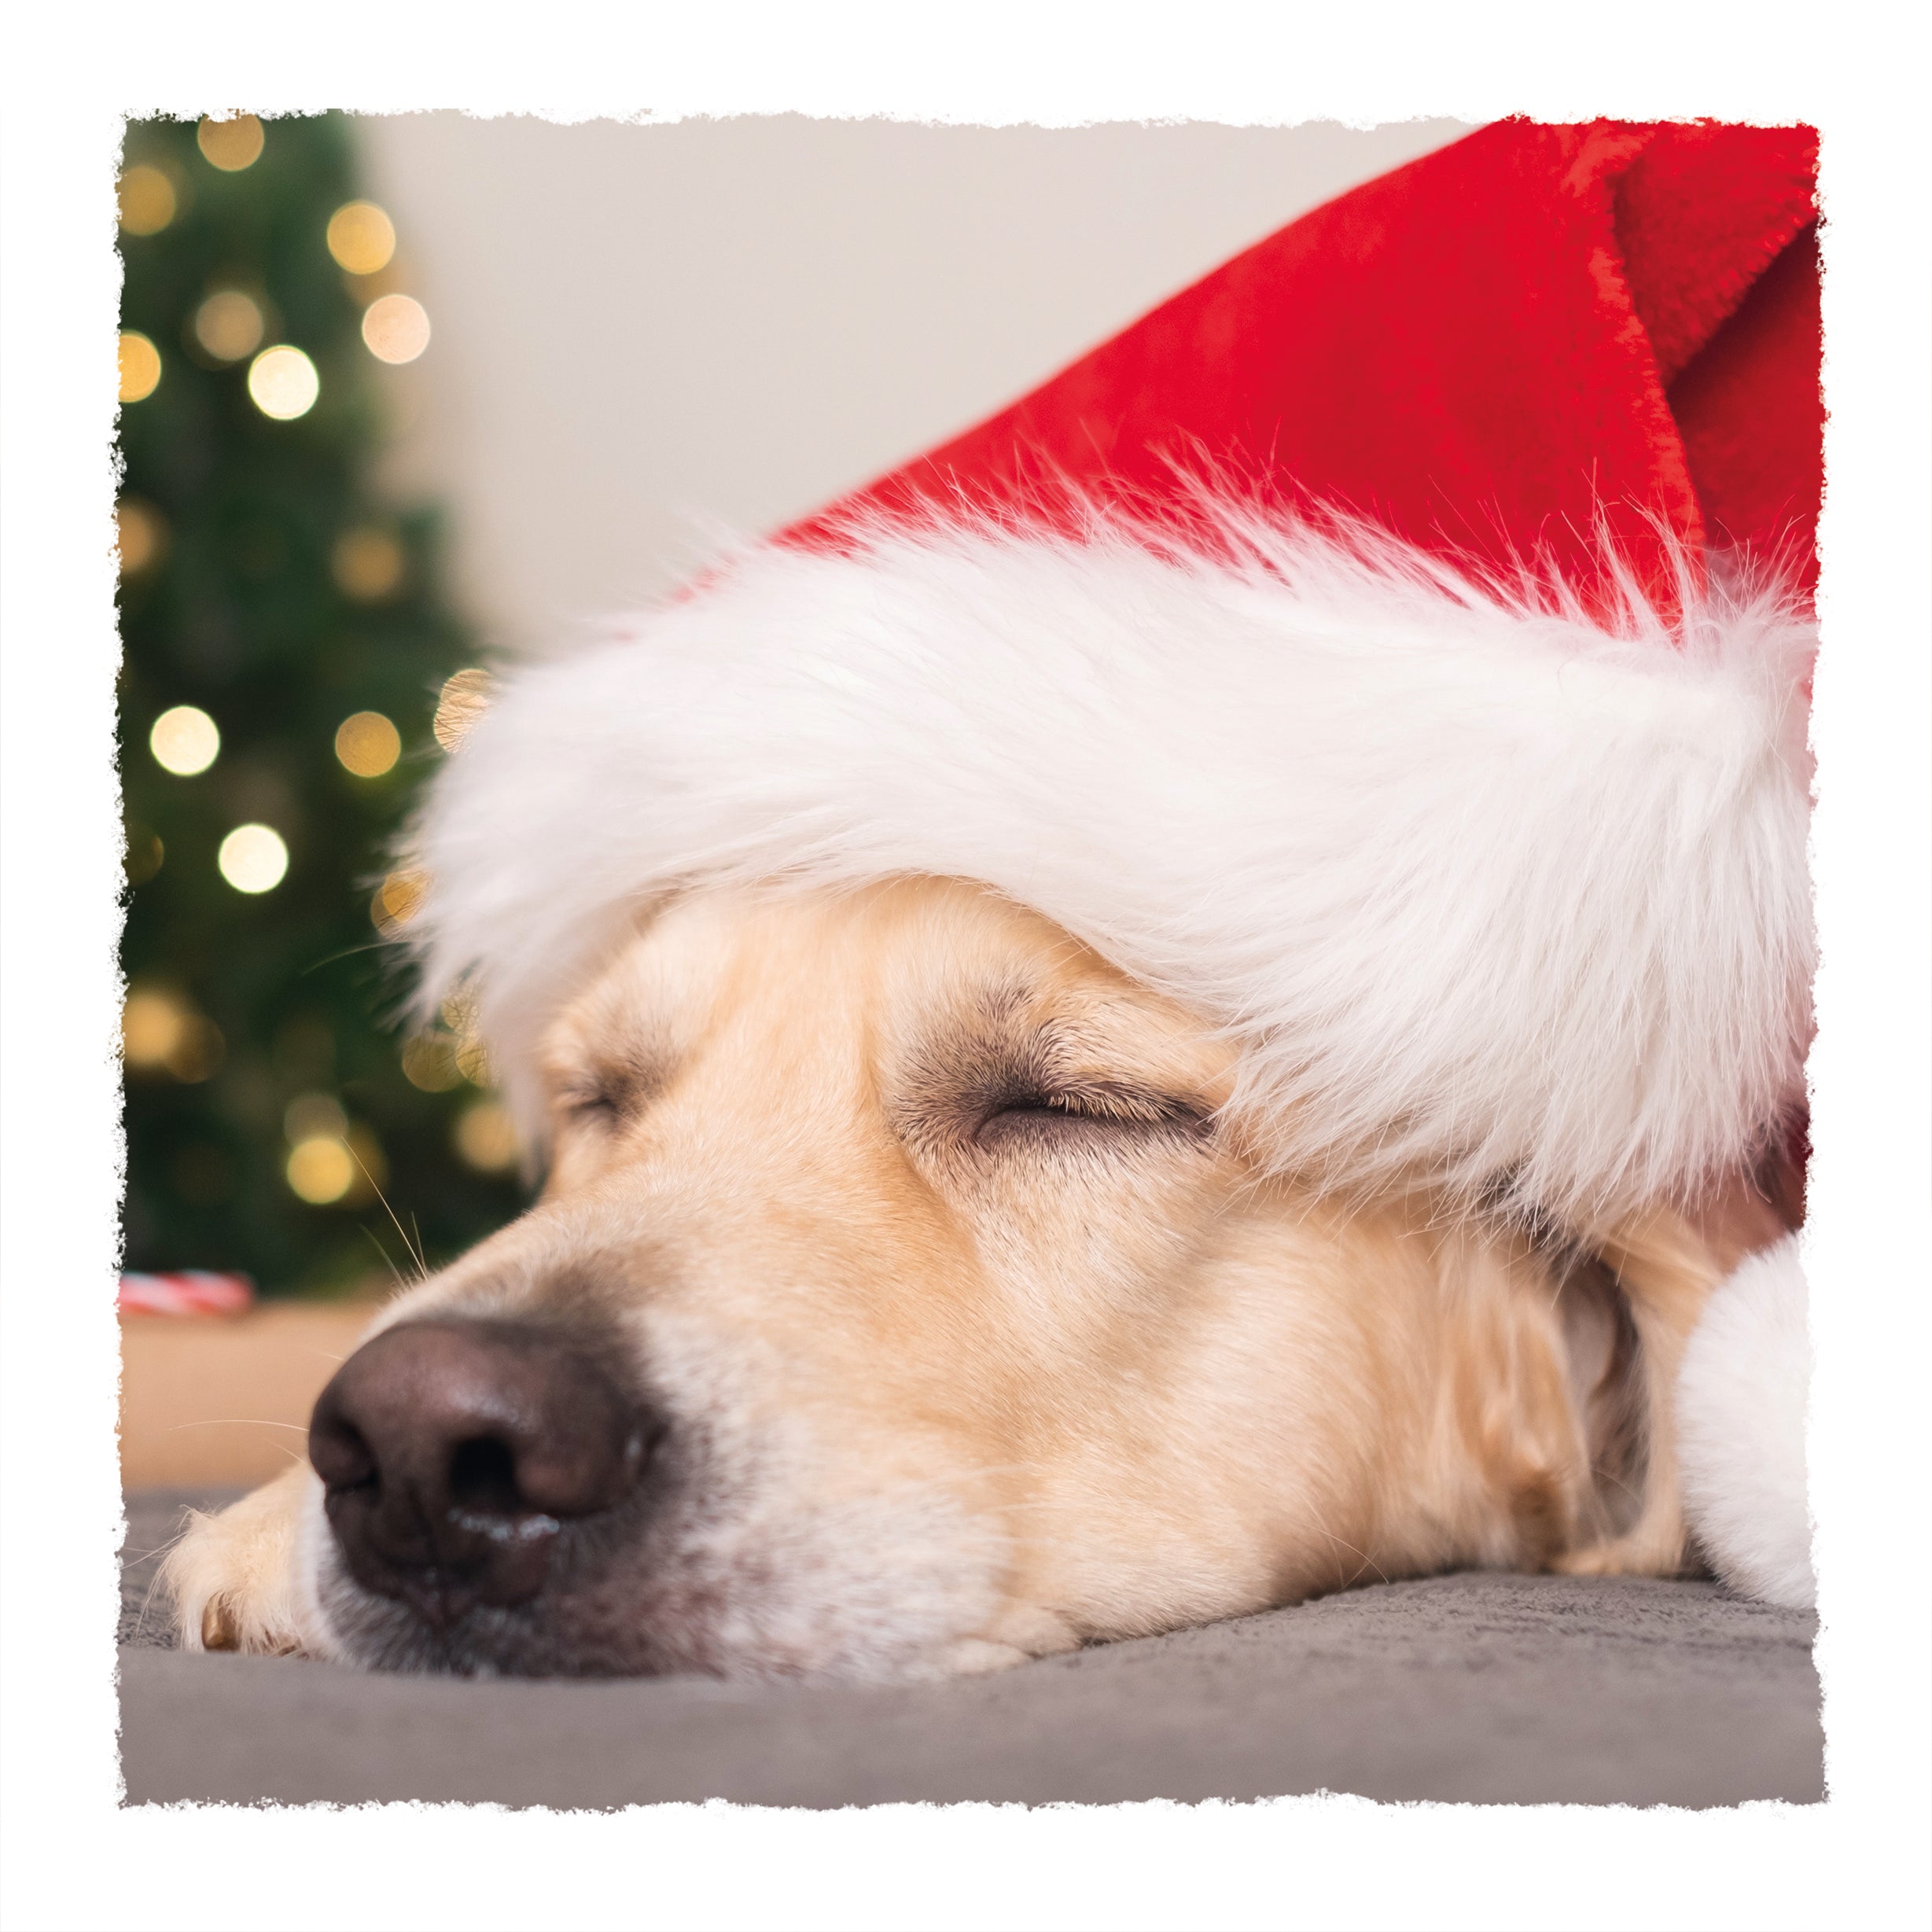 The design is an image of a dog sleeping in front of a Christmas tree with a Christmas hat on.